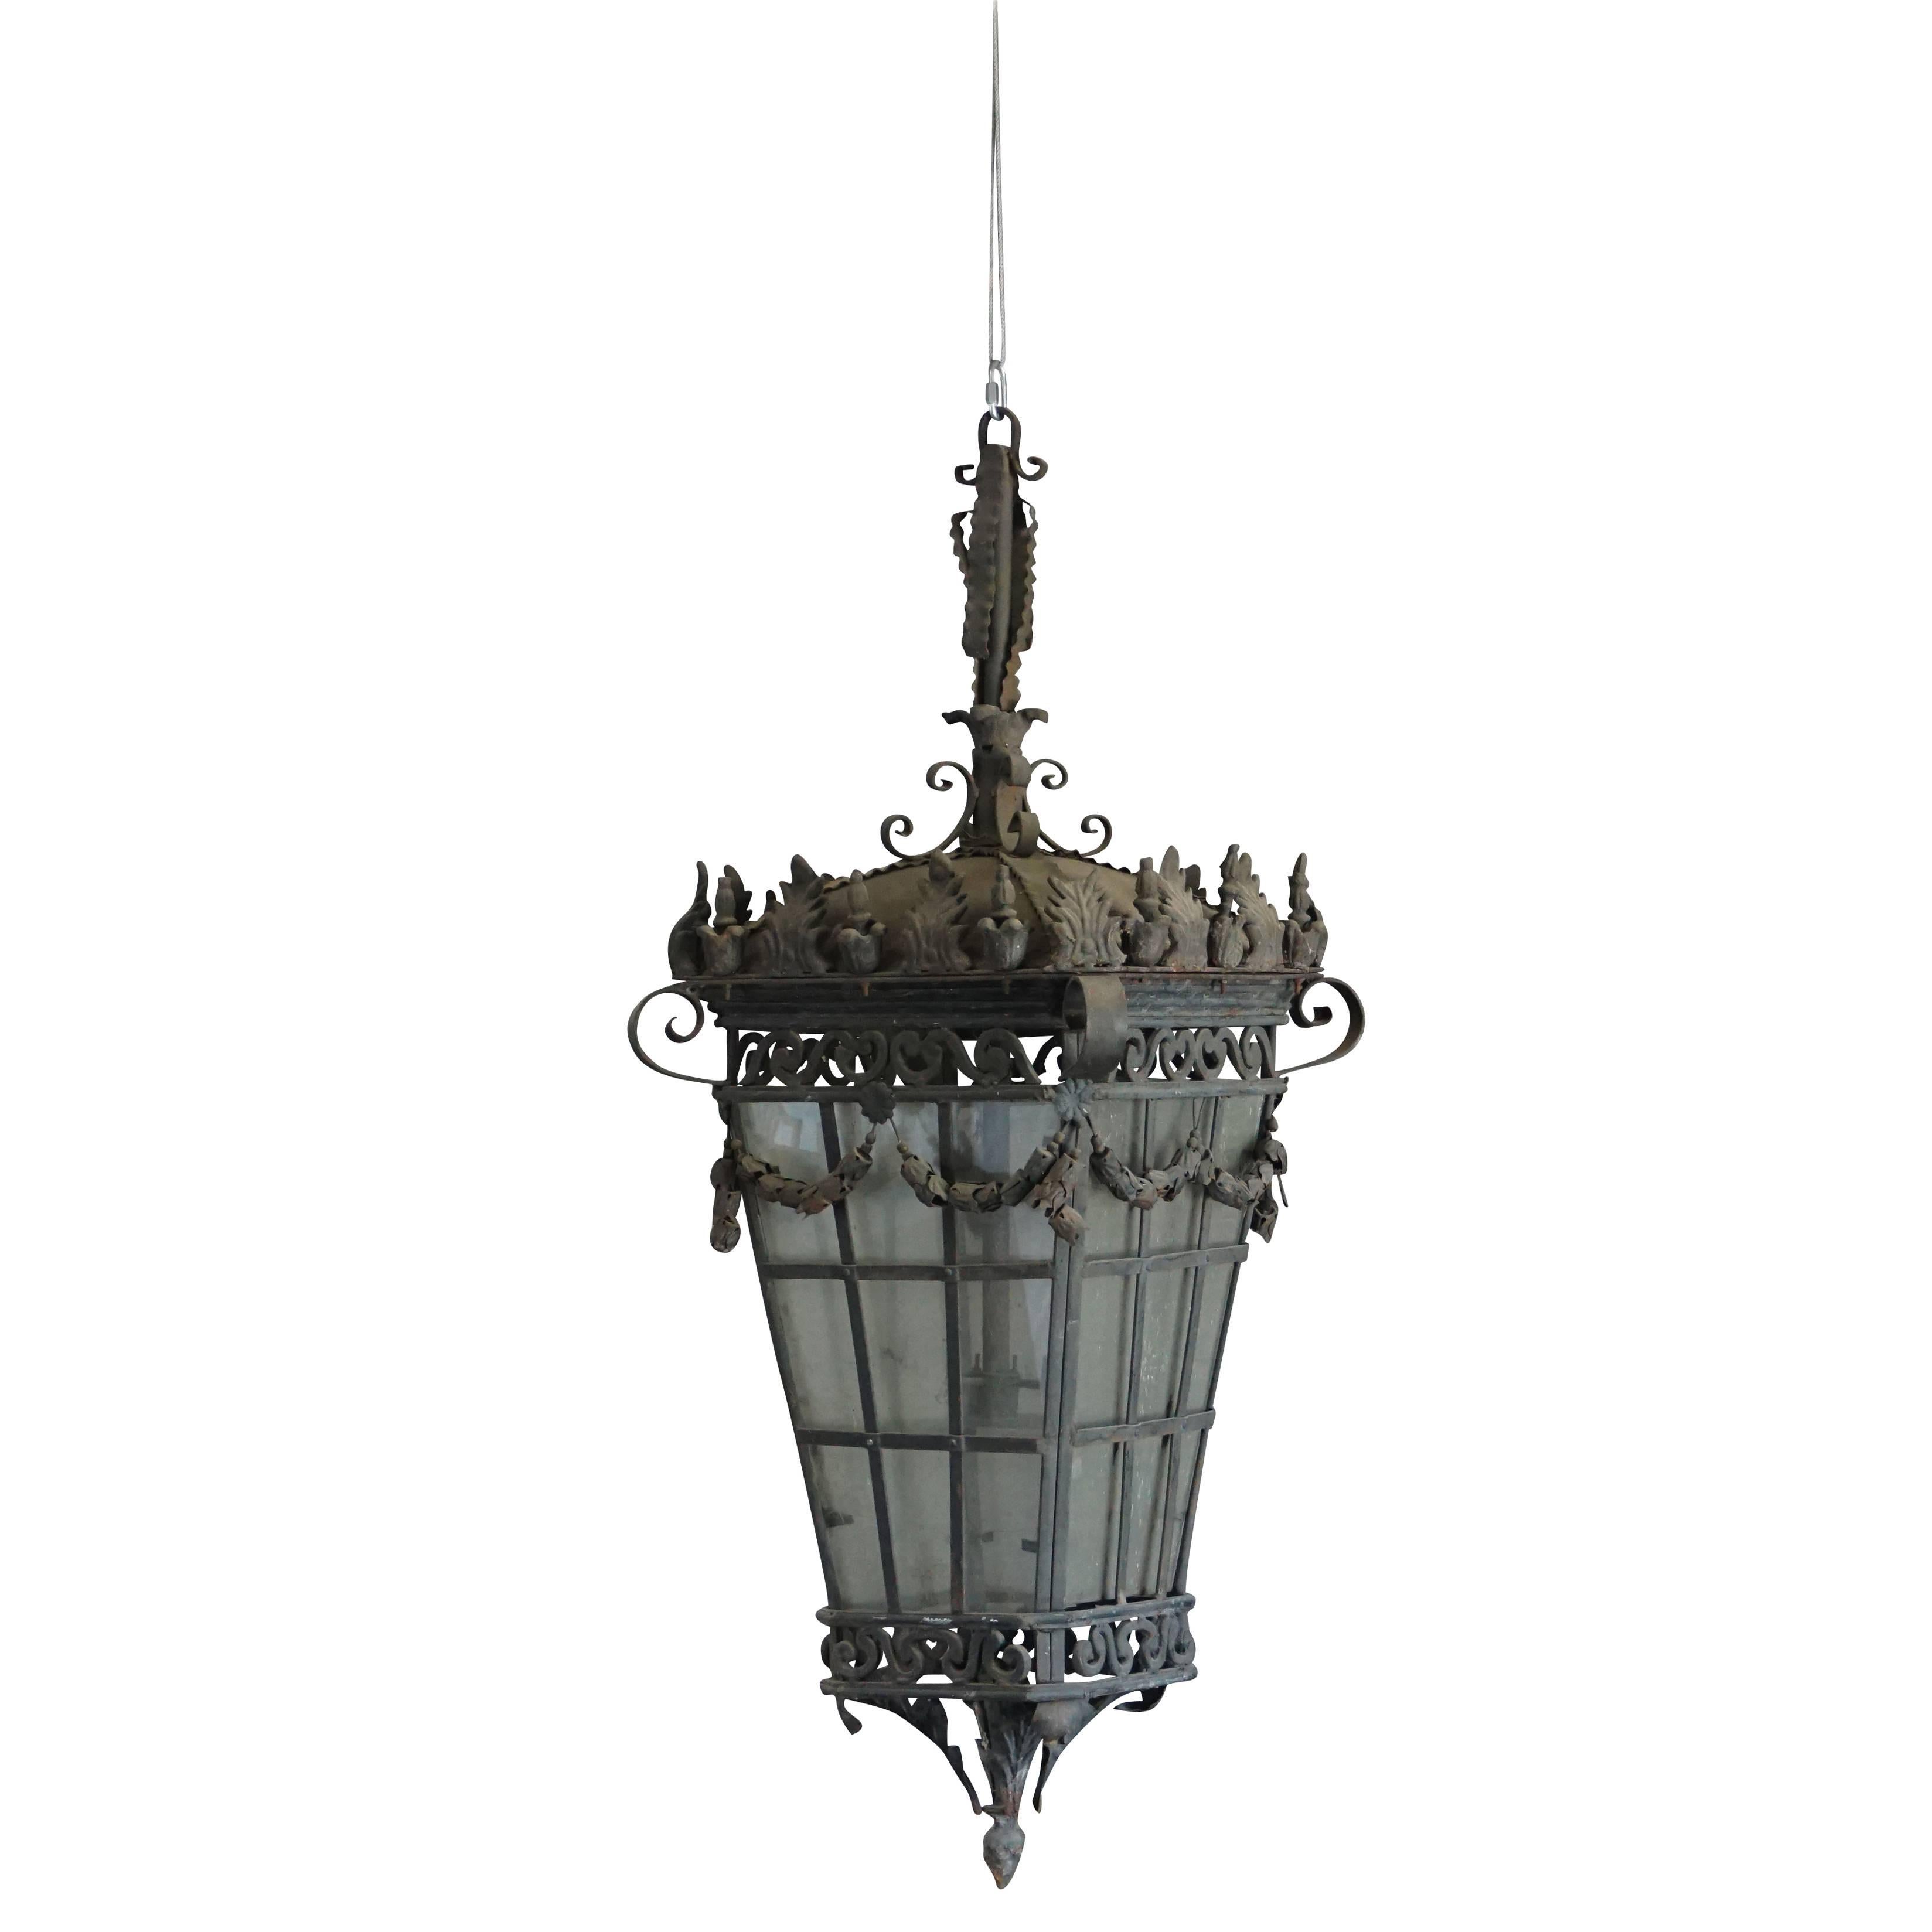 A large, vintage French Art Deco pair of monumental wrought iron hanging lanterns made of hand crafted metal and glass, enhanced by very detailed iron work, in good condition. Wear consistent with age and use. Circa 1920 Paris, France.